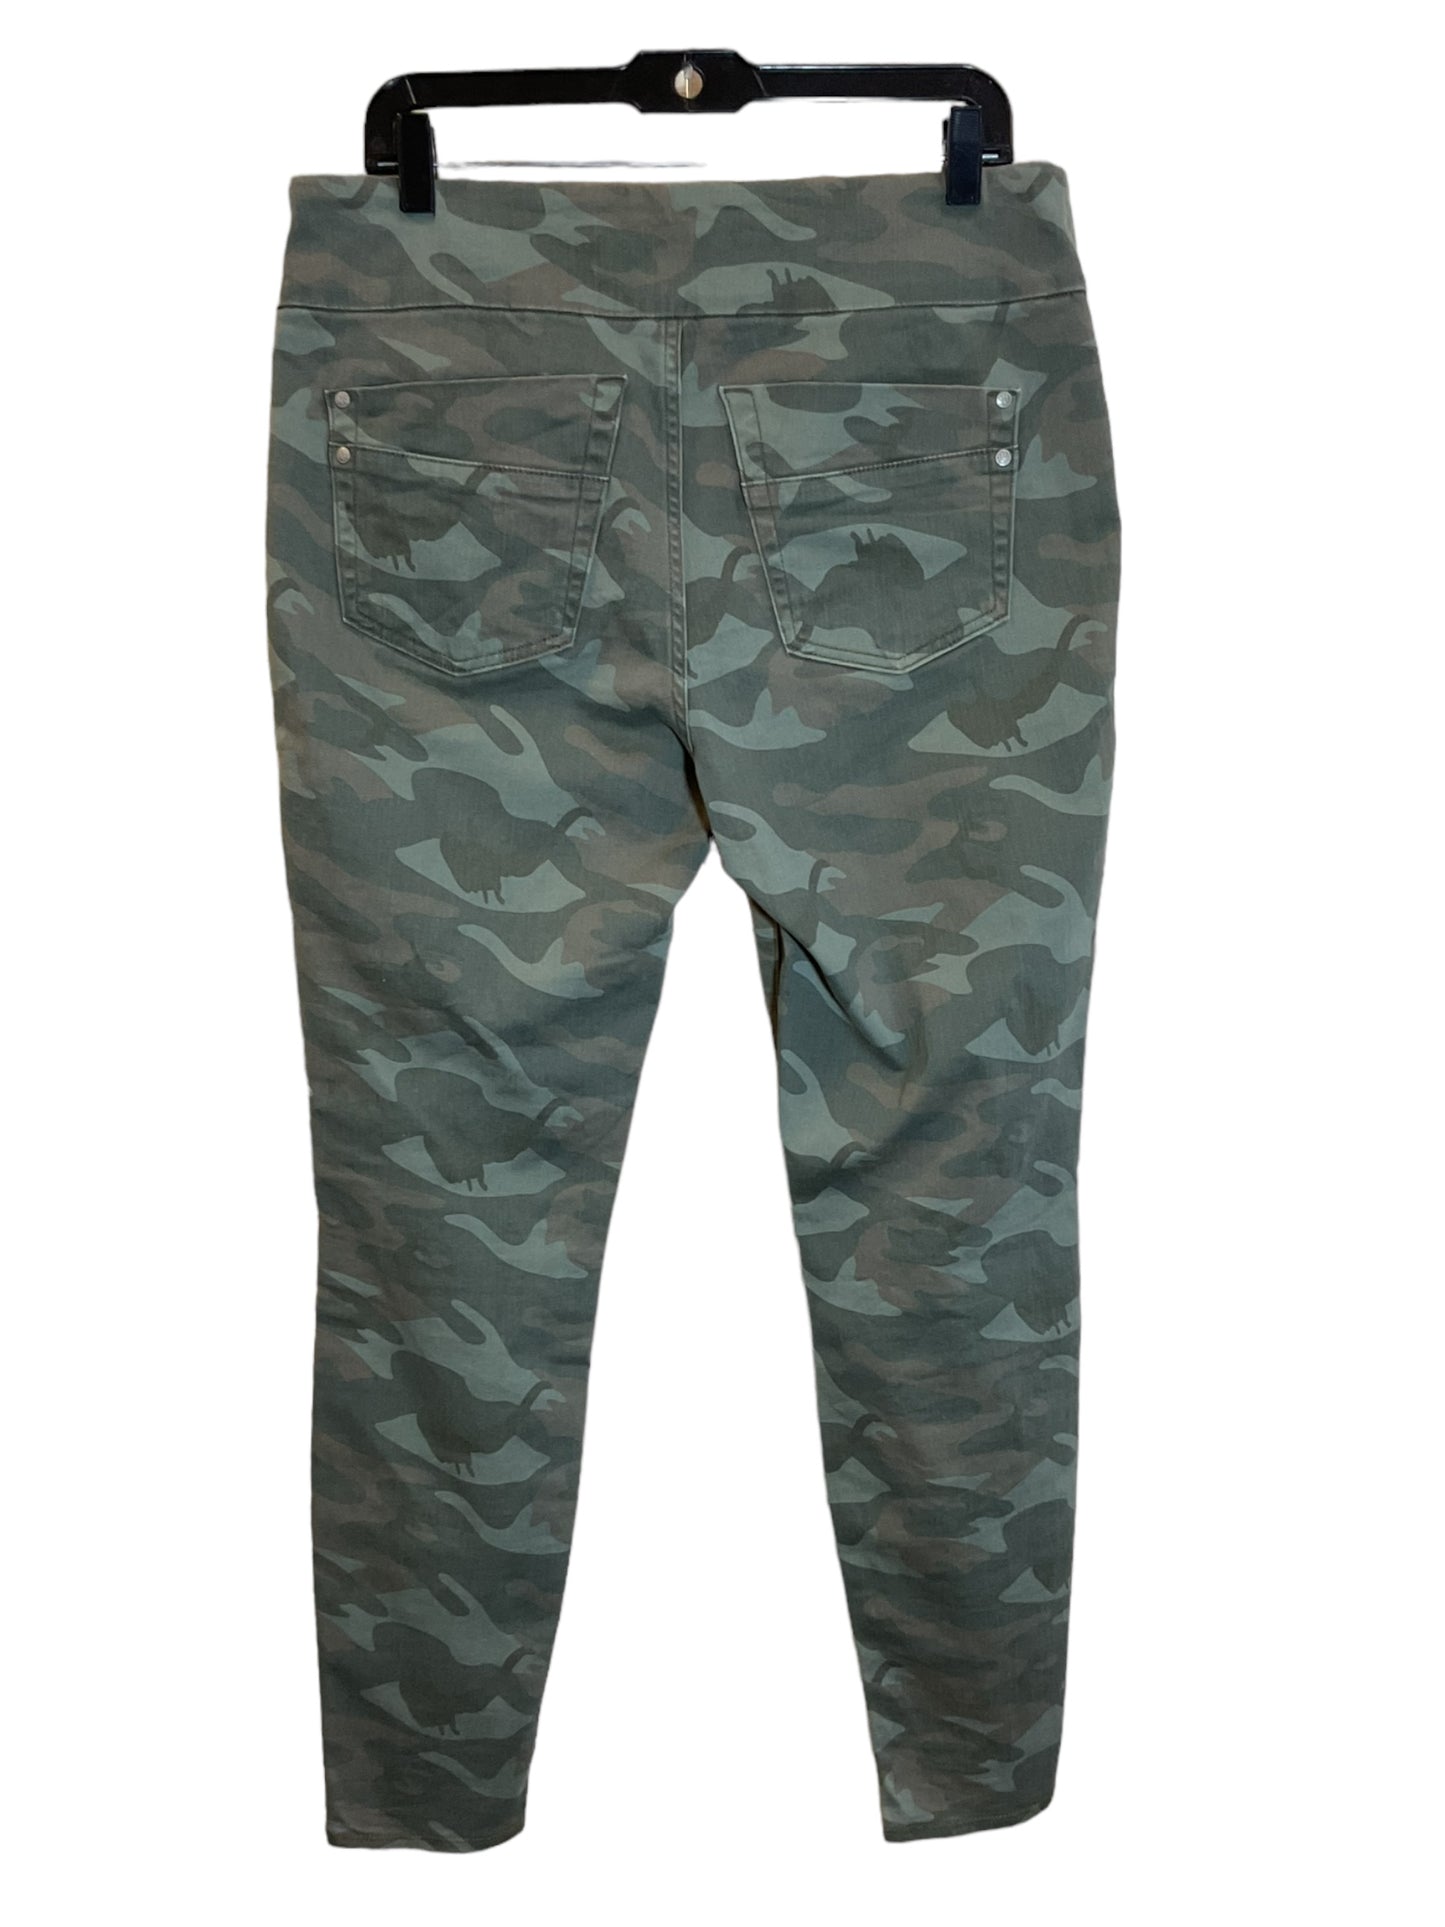 Pants Cargo & Utility By Rock And Republic  Size: 16